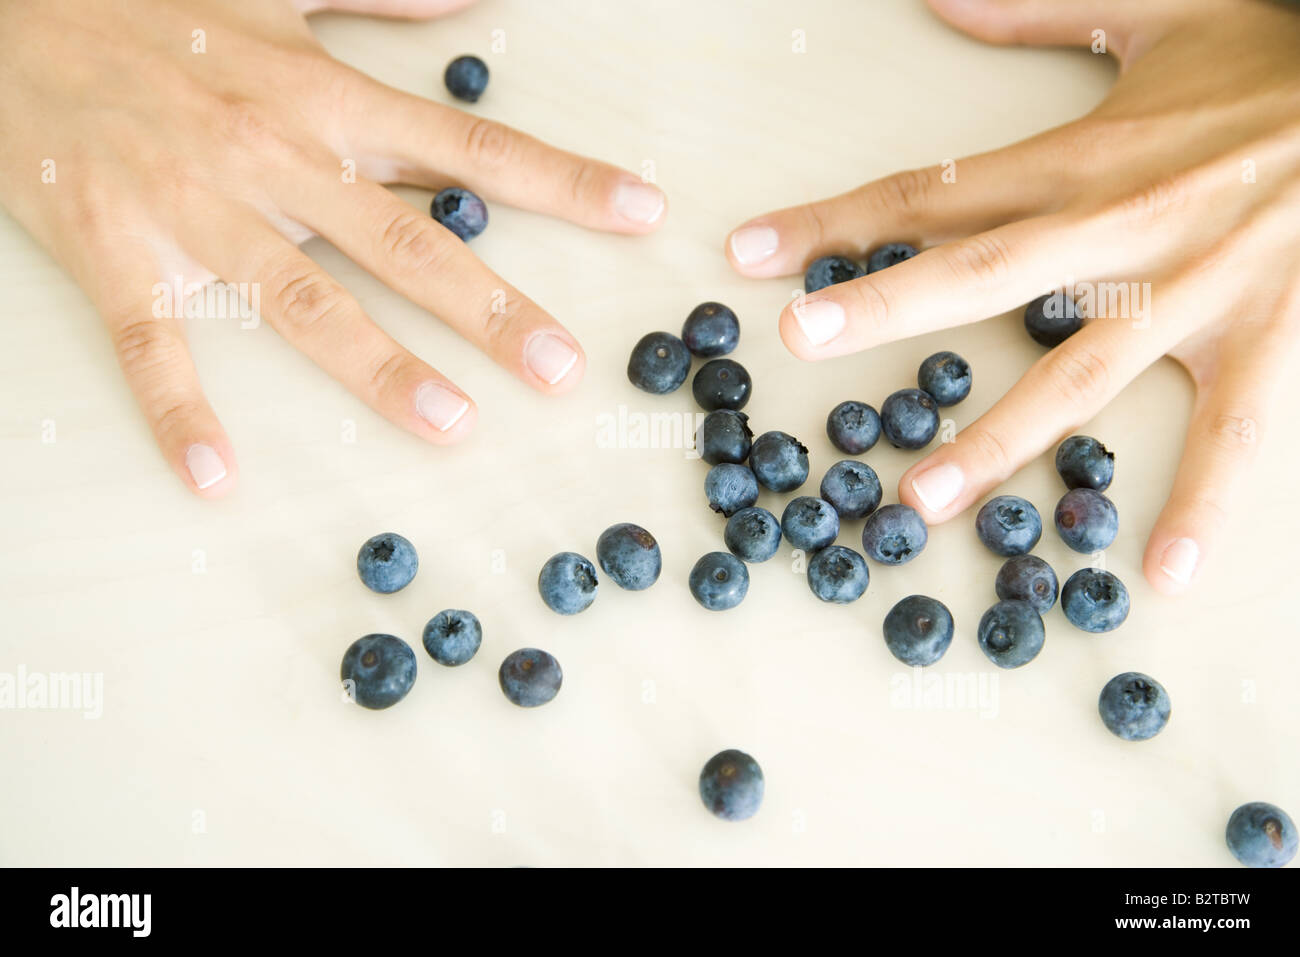 Pair of hands with fingers spread wide open above scattered blue berries Stock Photo